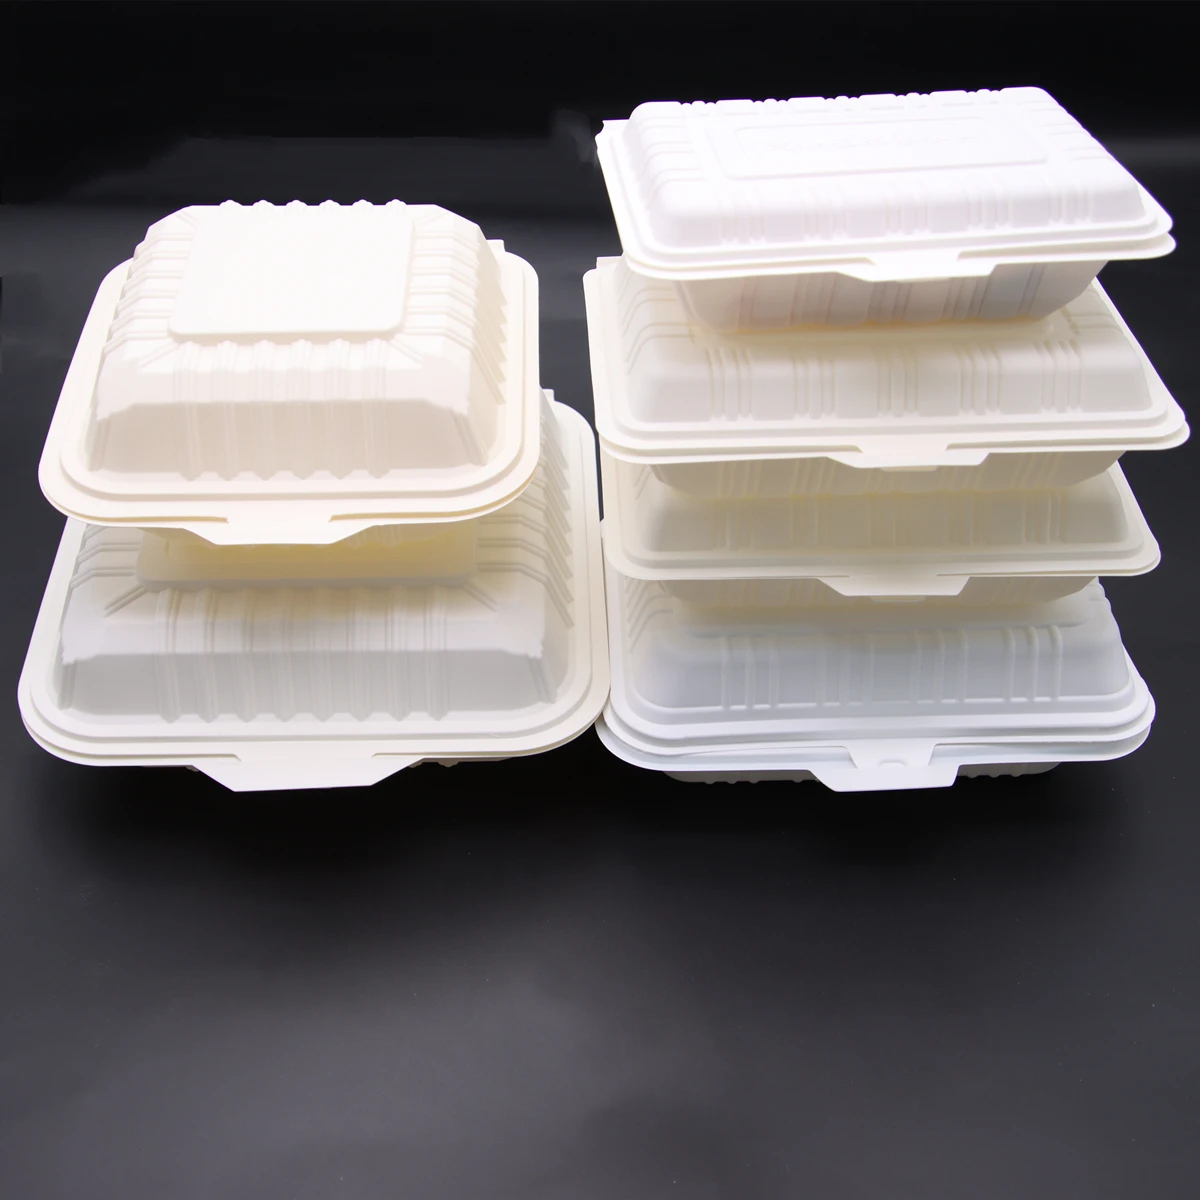 Factory 100% compostable biodegradable disposable dinner plates with lids sugarcane bagasse paper plates (1600432499575)